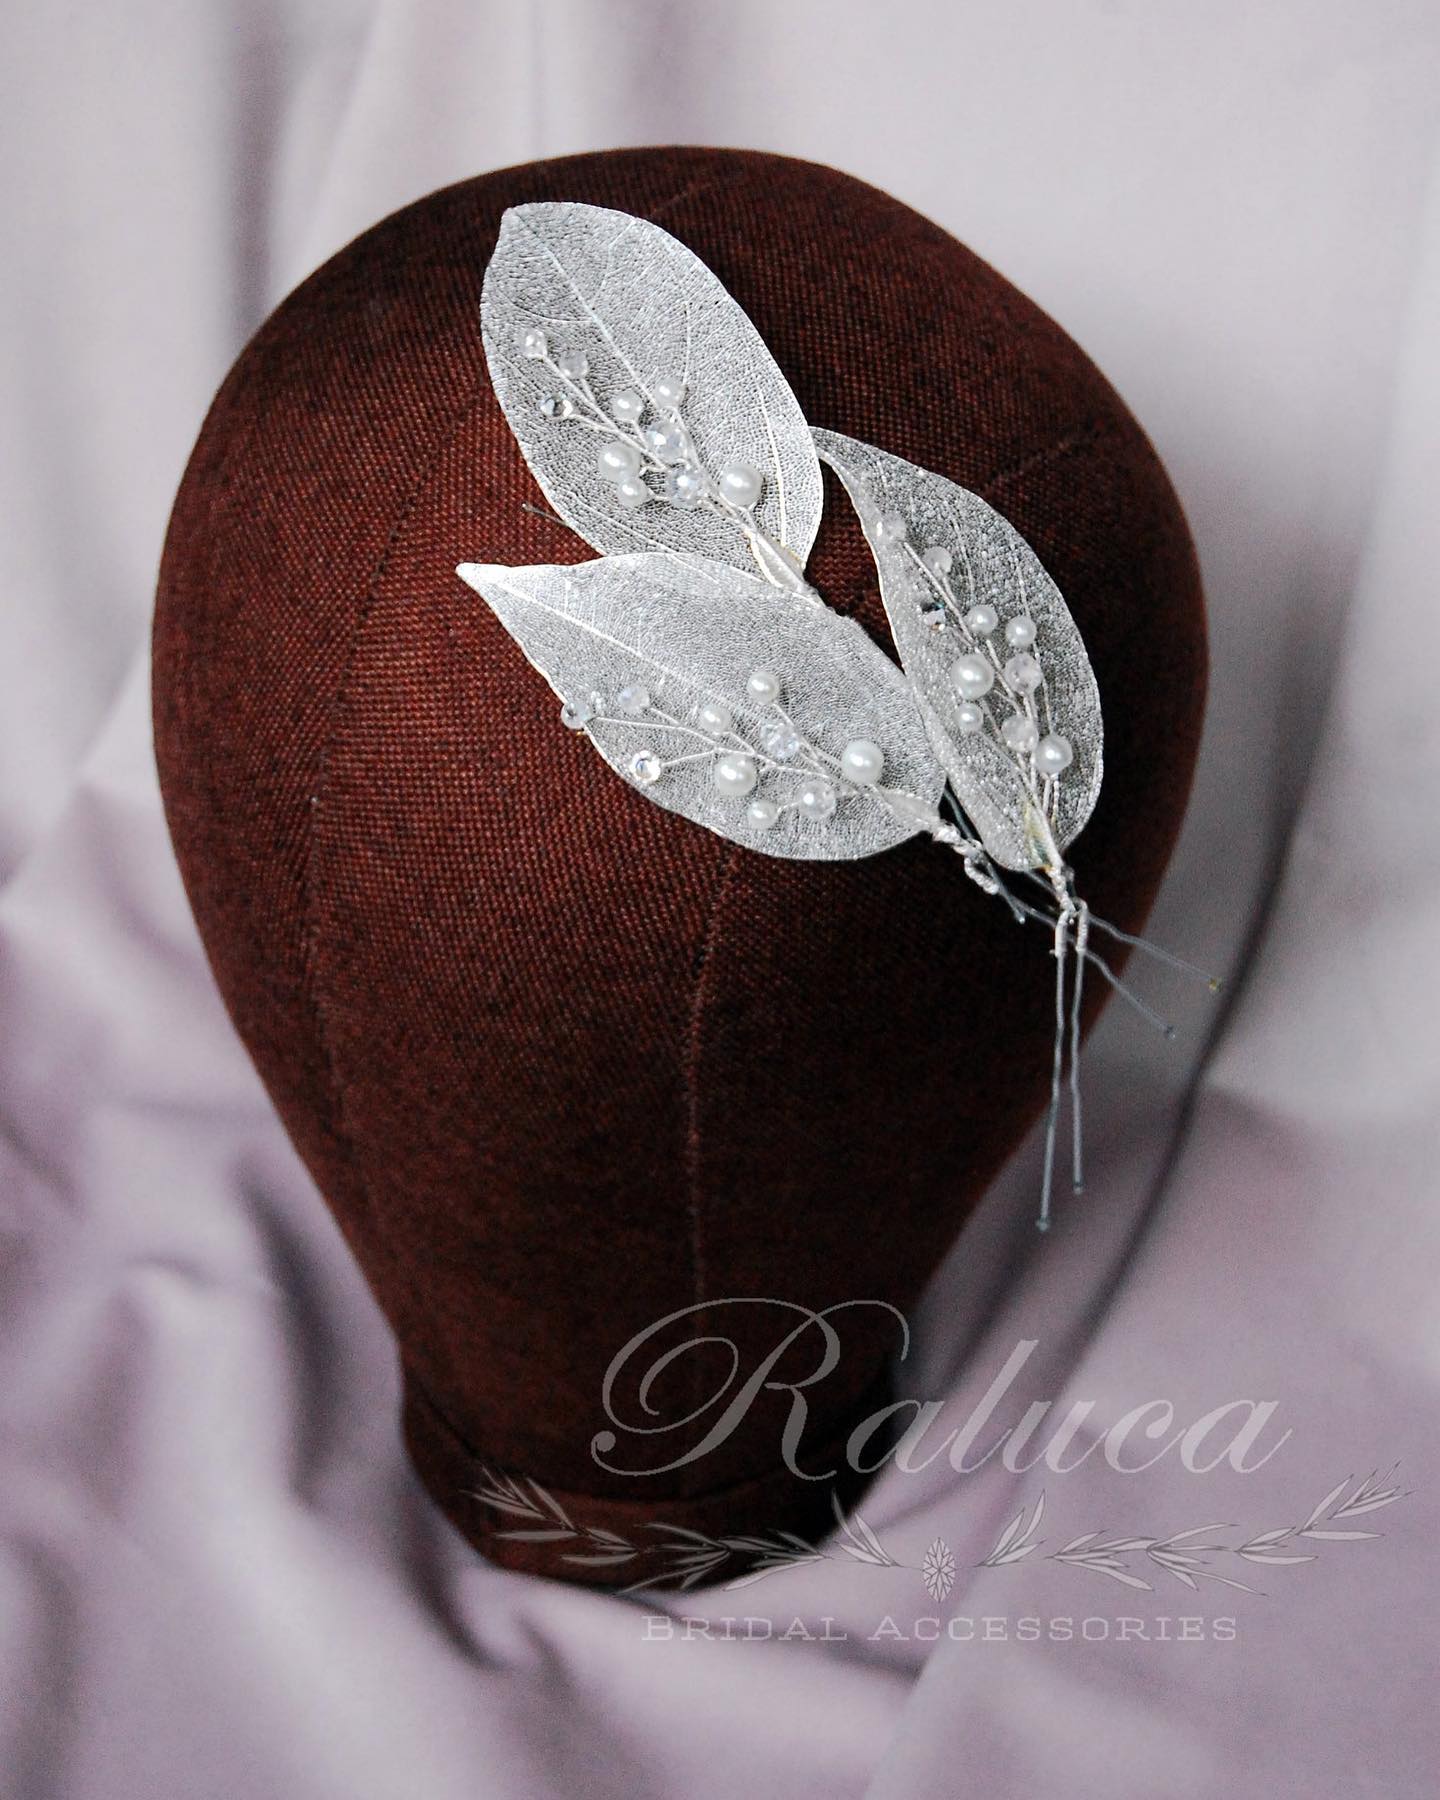 One of the top publications of @raluca.bridal.accessories which has 13 likes and 0 comments